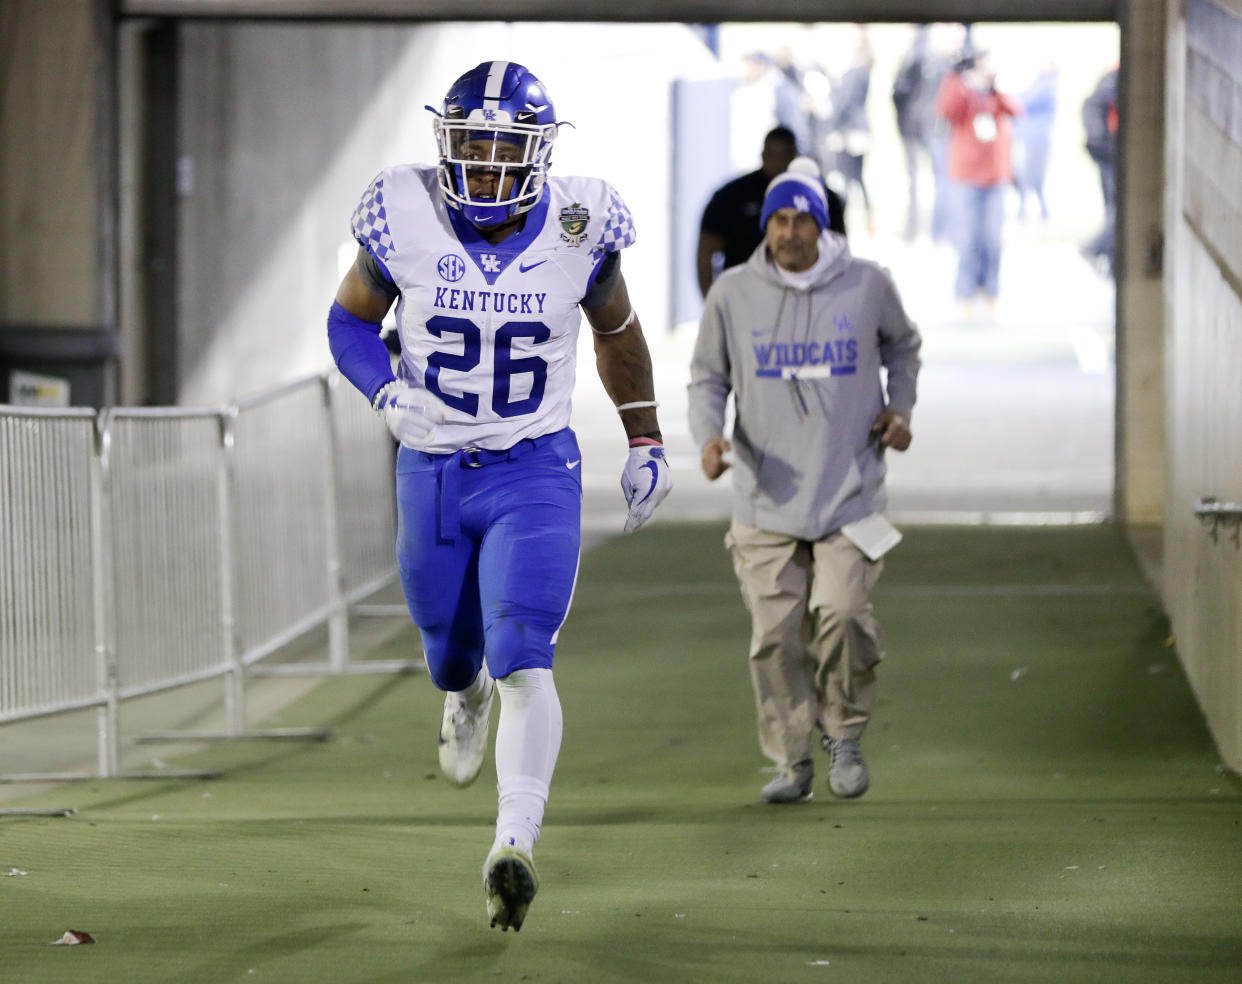 Kentucky running back Benny Snell Jr. (26) runs to the locker room after being ejected in the first half of the Music City Bowl NCAA college football game against Northwestern, Friday, Dec. 29, 2017, in Nashville, Tenn. (AP Photo/Mark Humphrey)